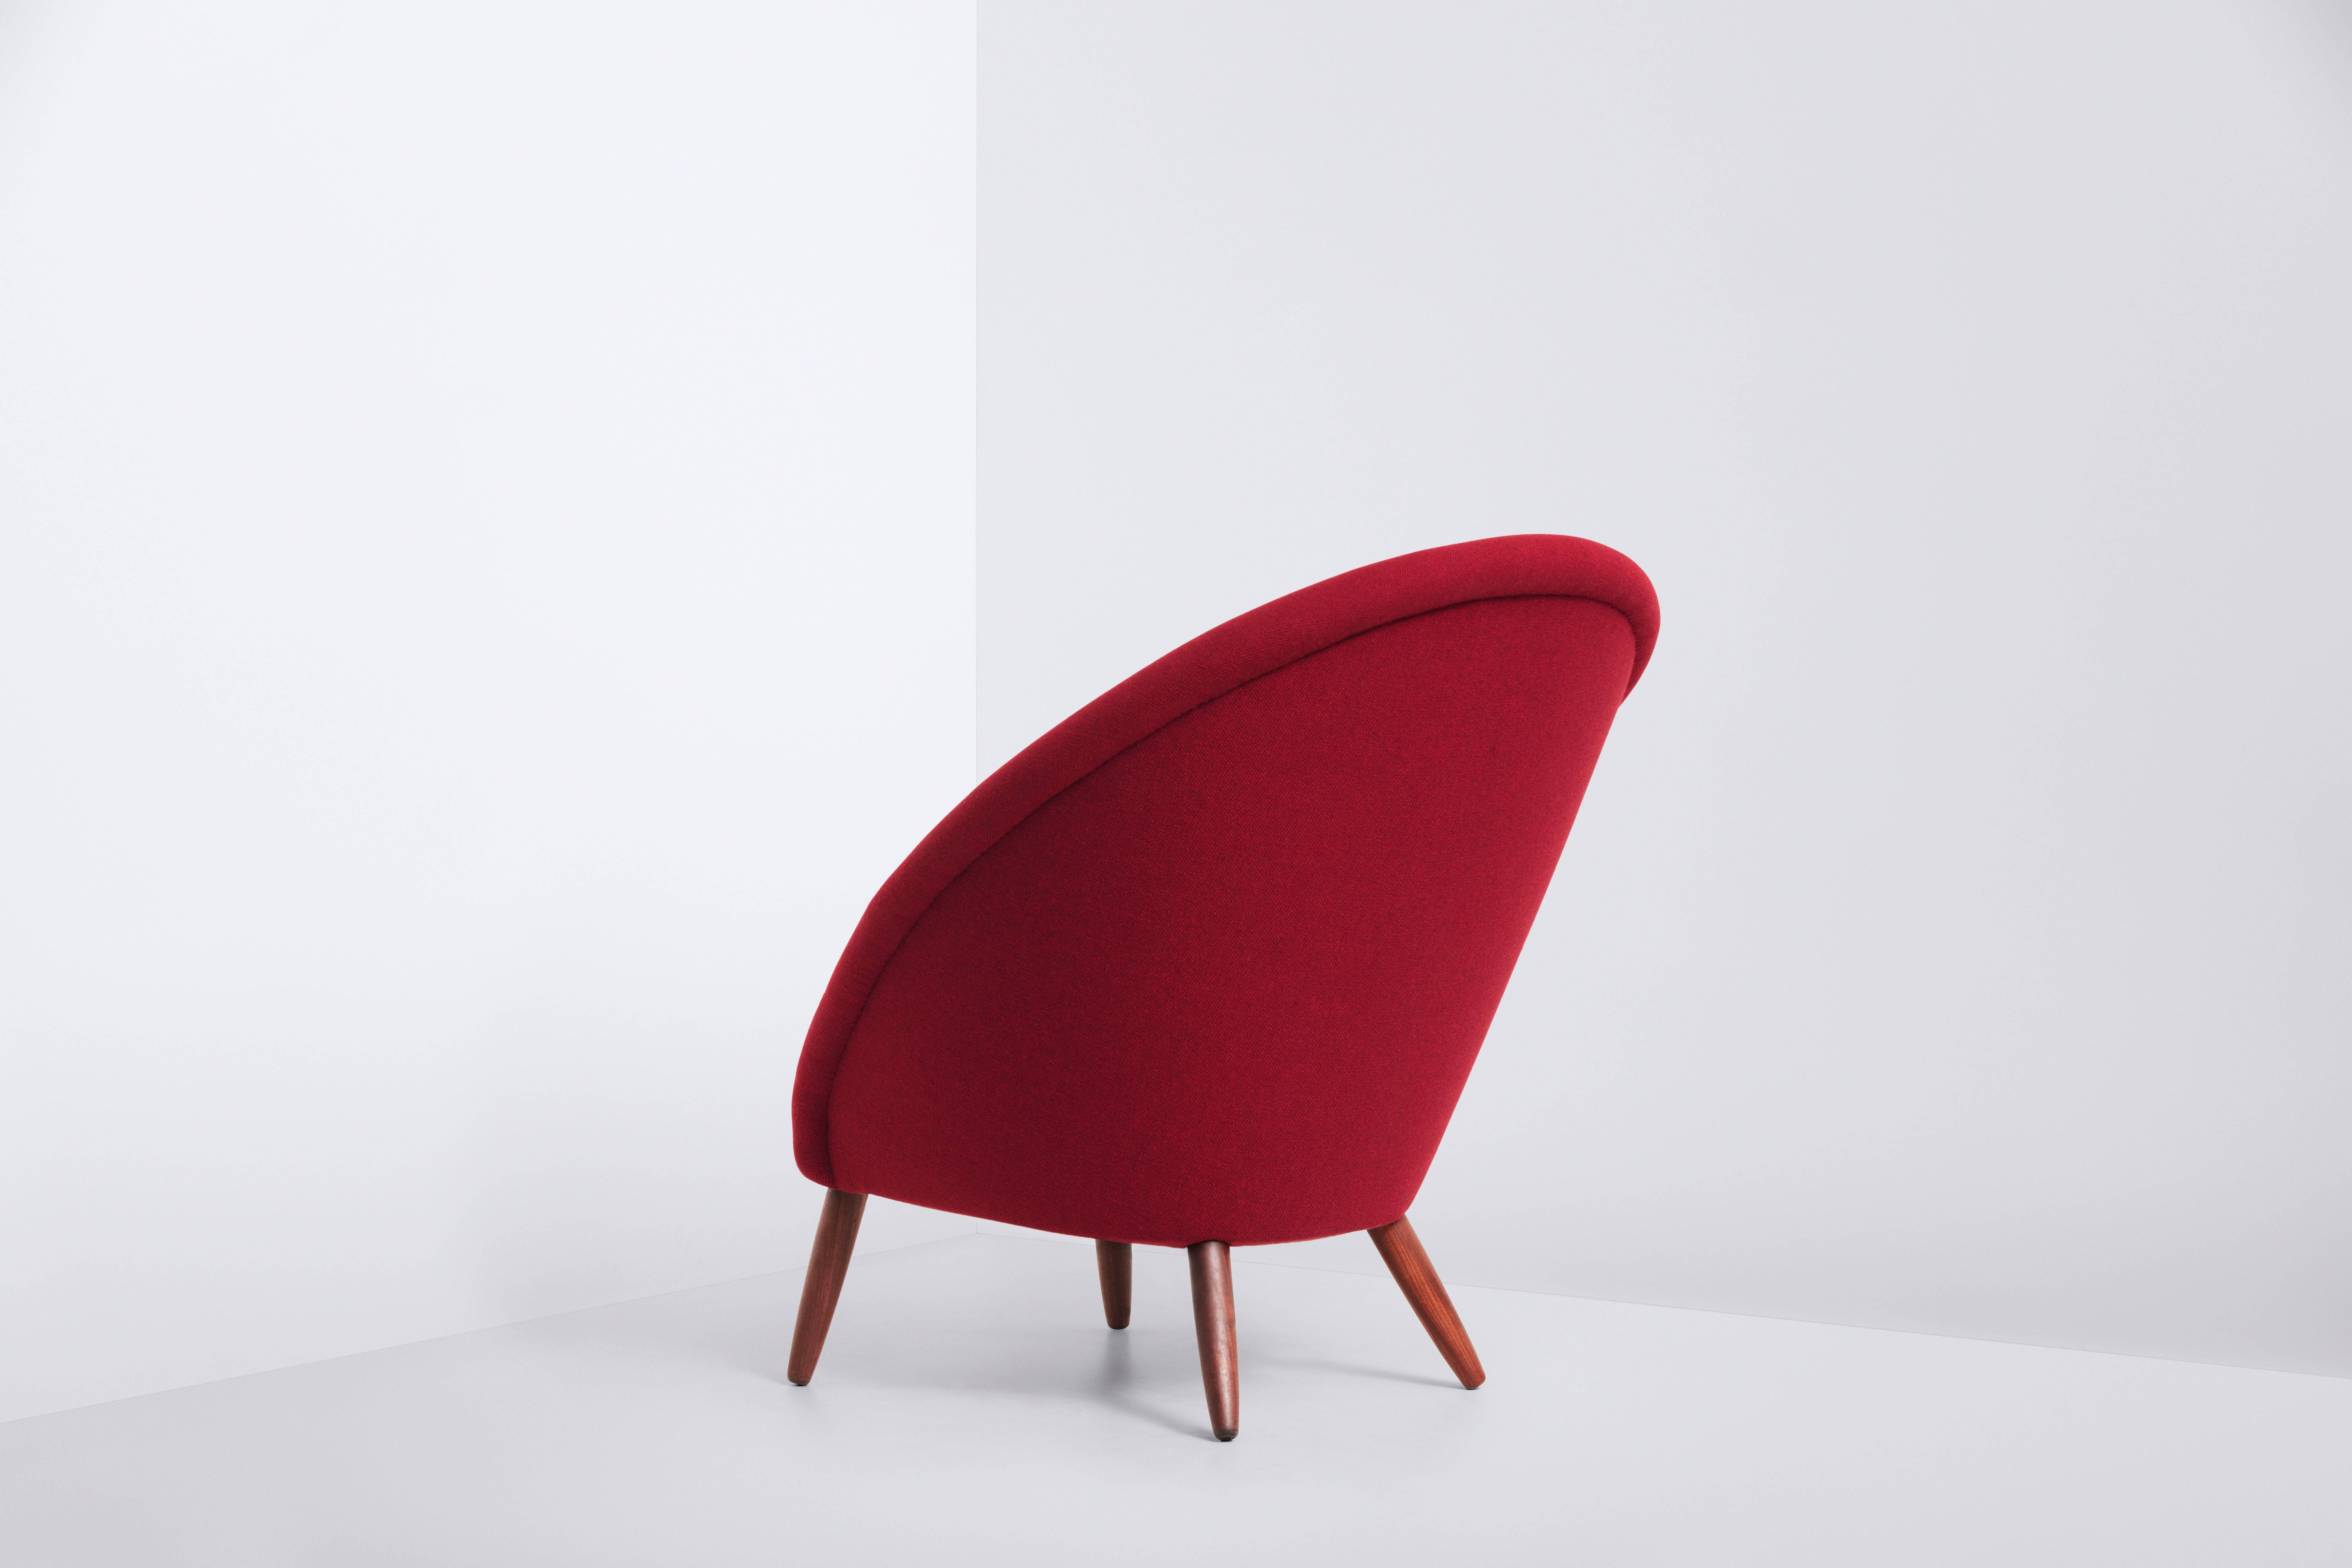 Mid-Century Modern Lounge Chair Designed by Nanna and Jørgen Ditzel in 1956, Danish Produced 1950s For Sale